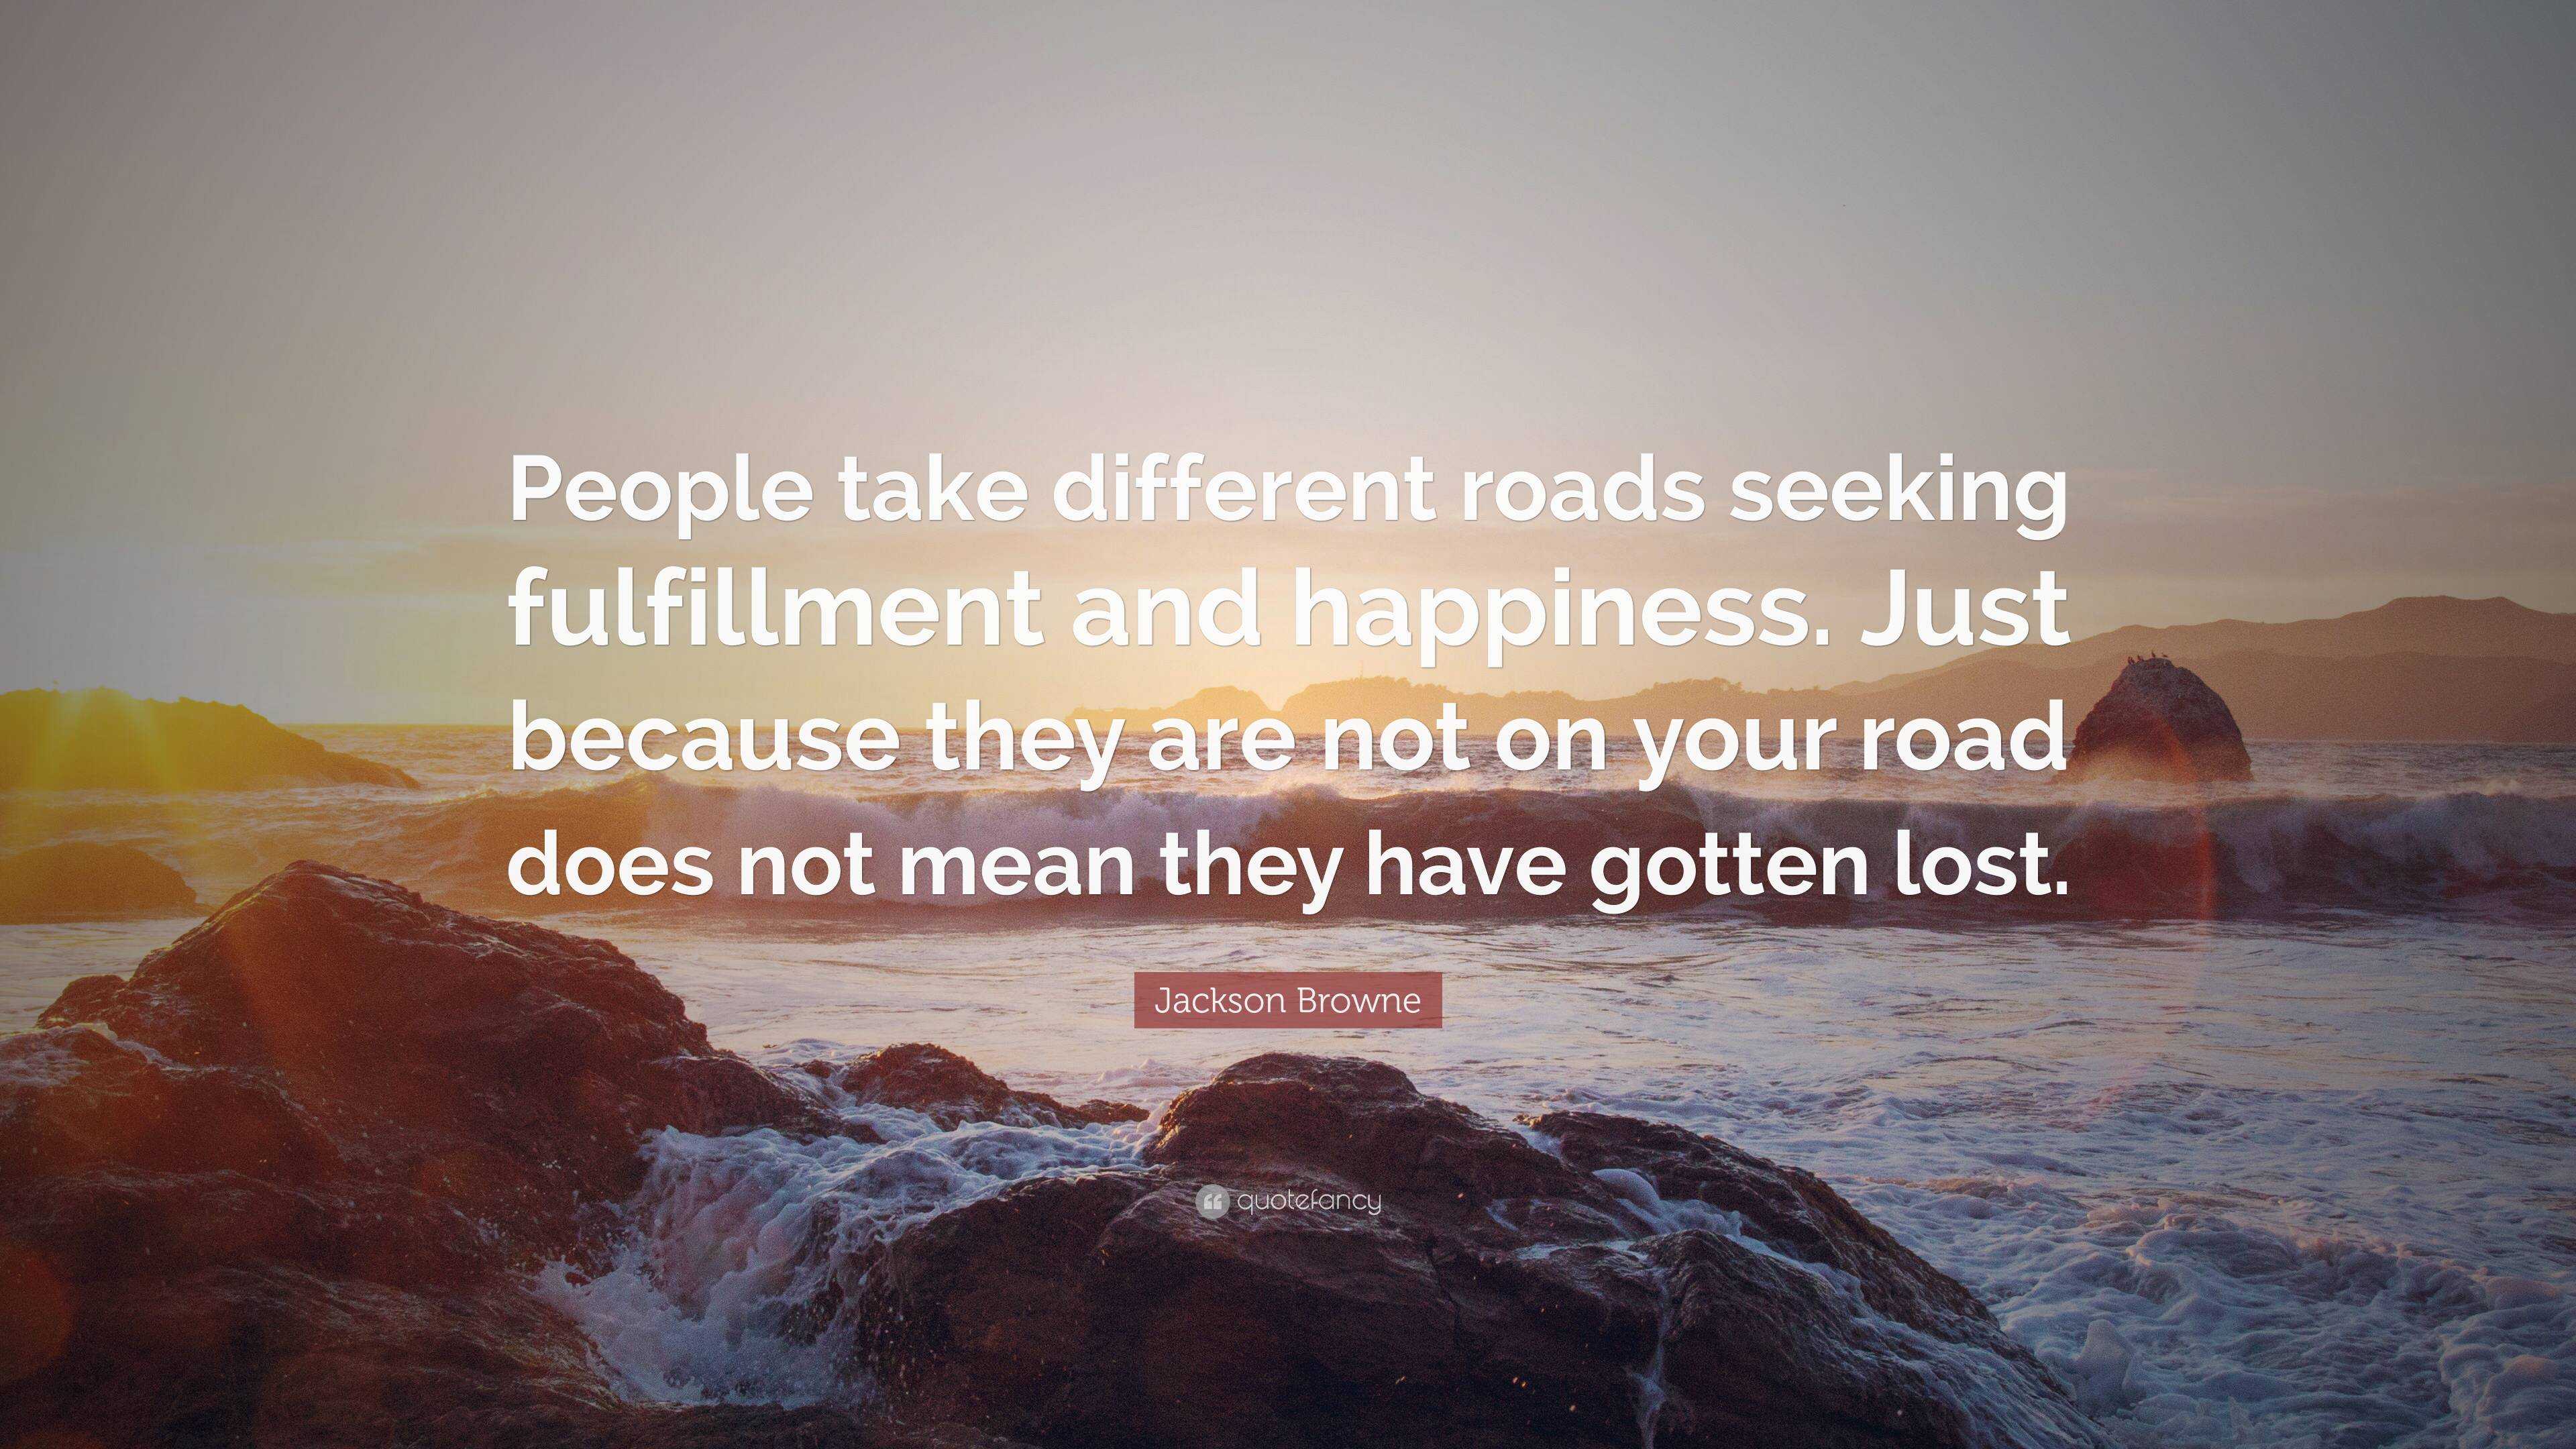 Jackson Browne Quote: “People take different roads seeking fulfillment ...